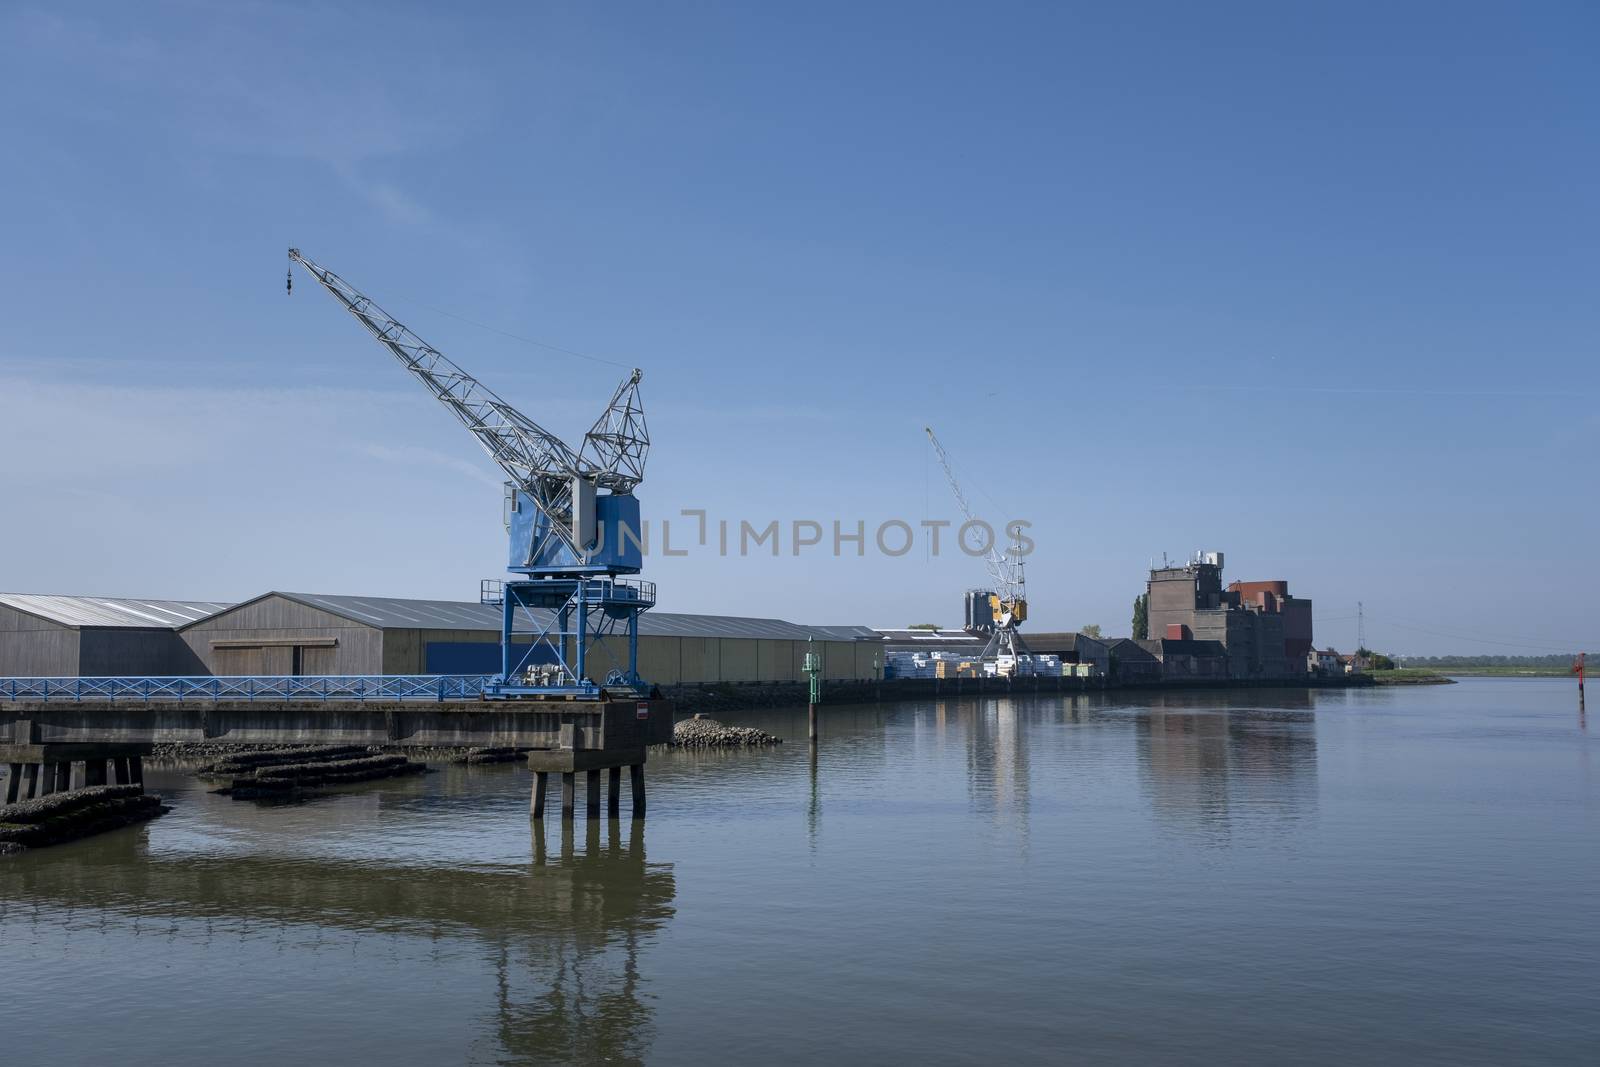 Cranes near the river against blue sky. Industrial landscape, in by Tjeerdkruse